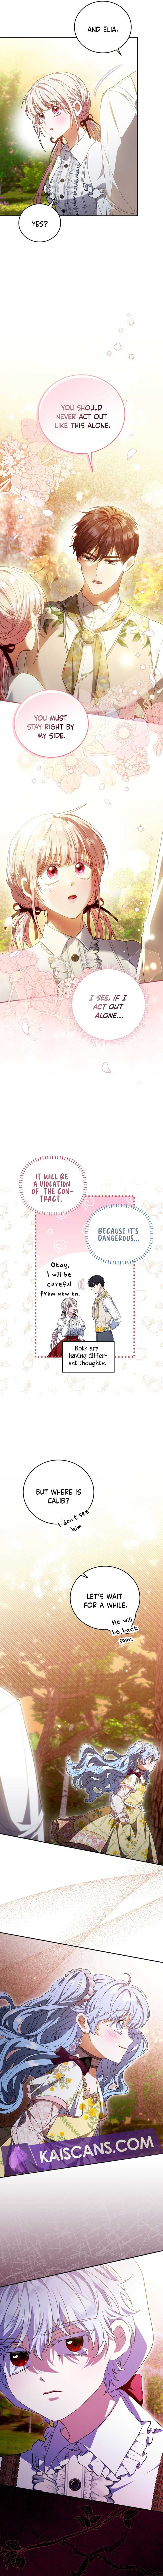 I Became the Young Villain’s Sister-In-Law chapter 32